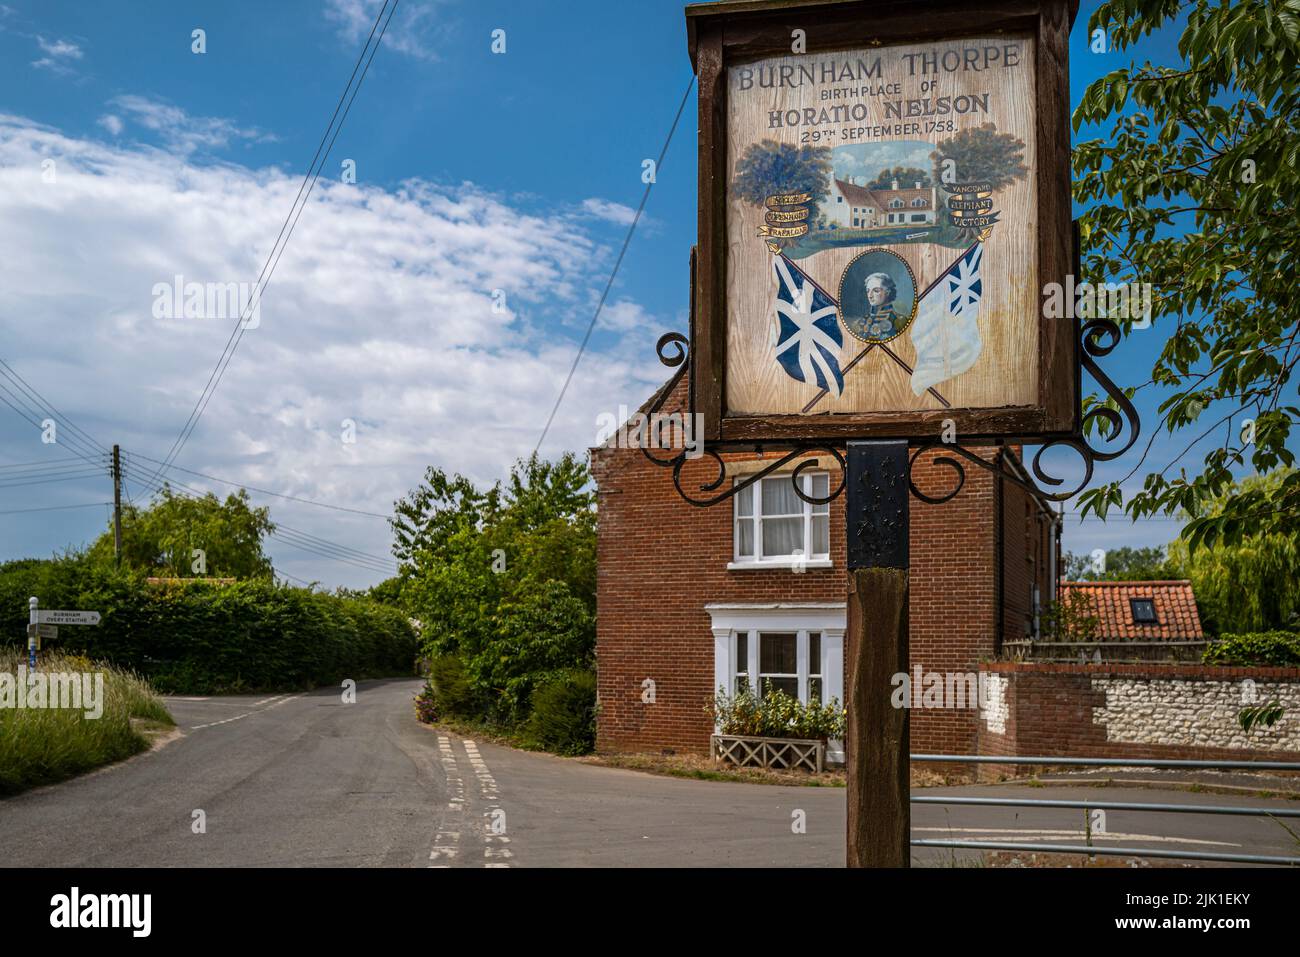 Village sign at Burnham Thorpe in Norfolk which was the birthplace of Admiral Lord Nelson. Stock Photo